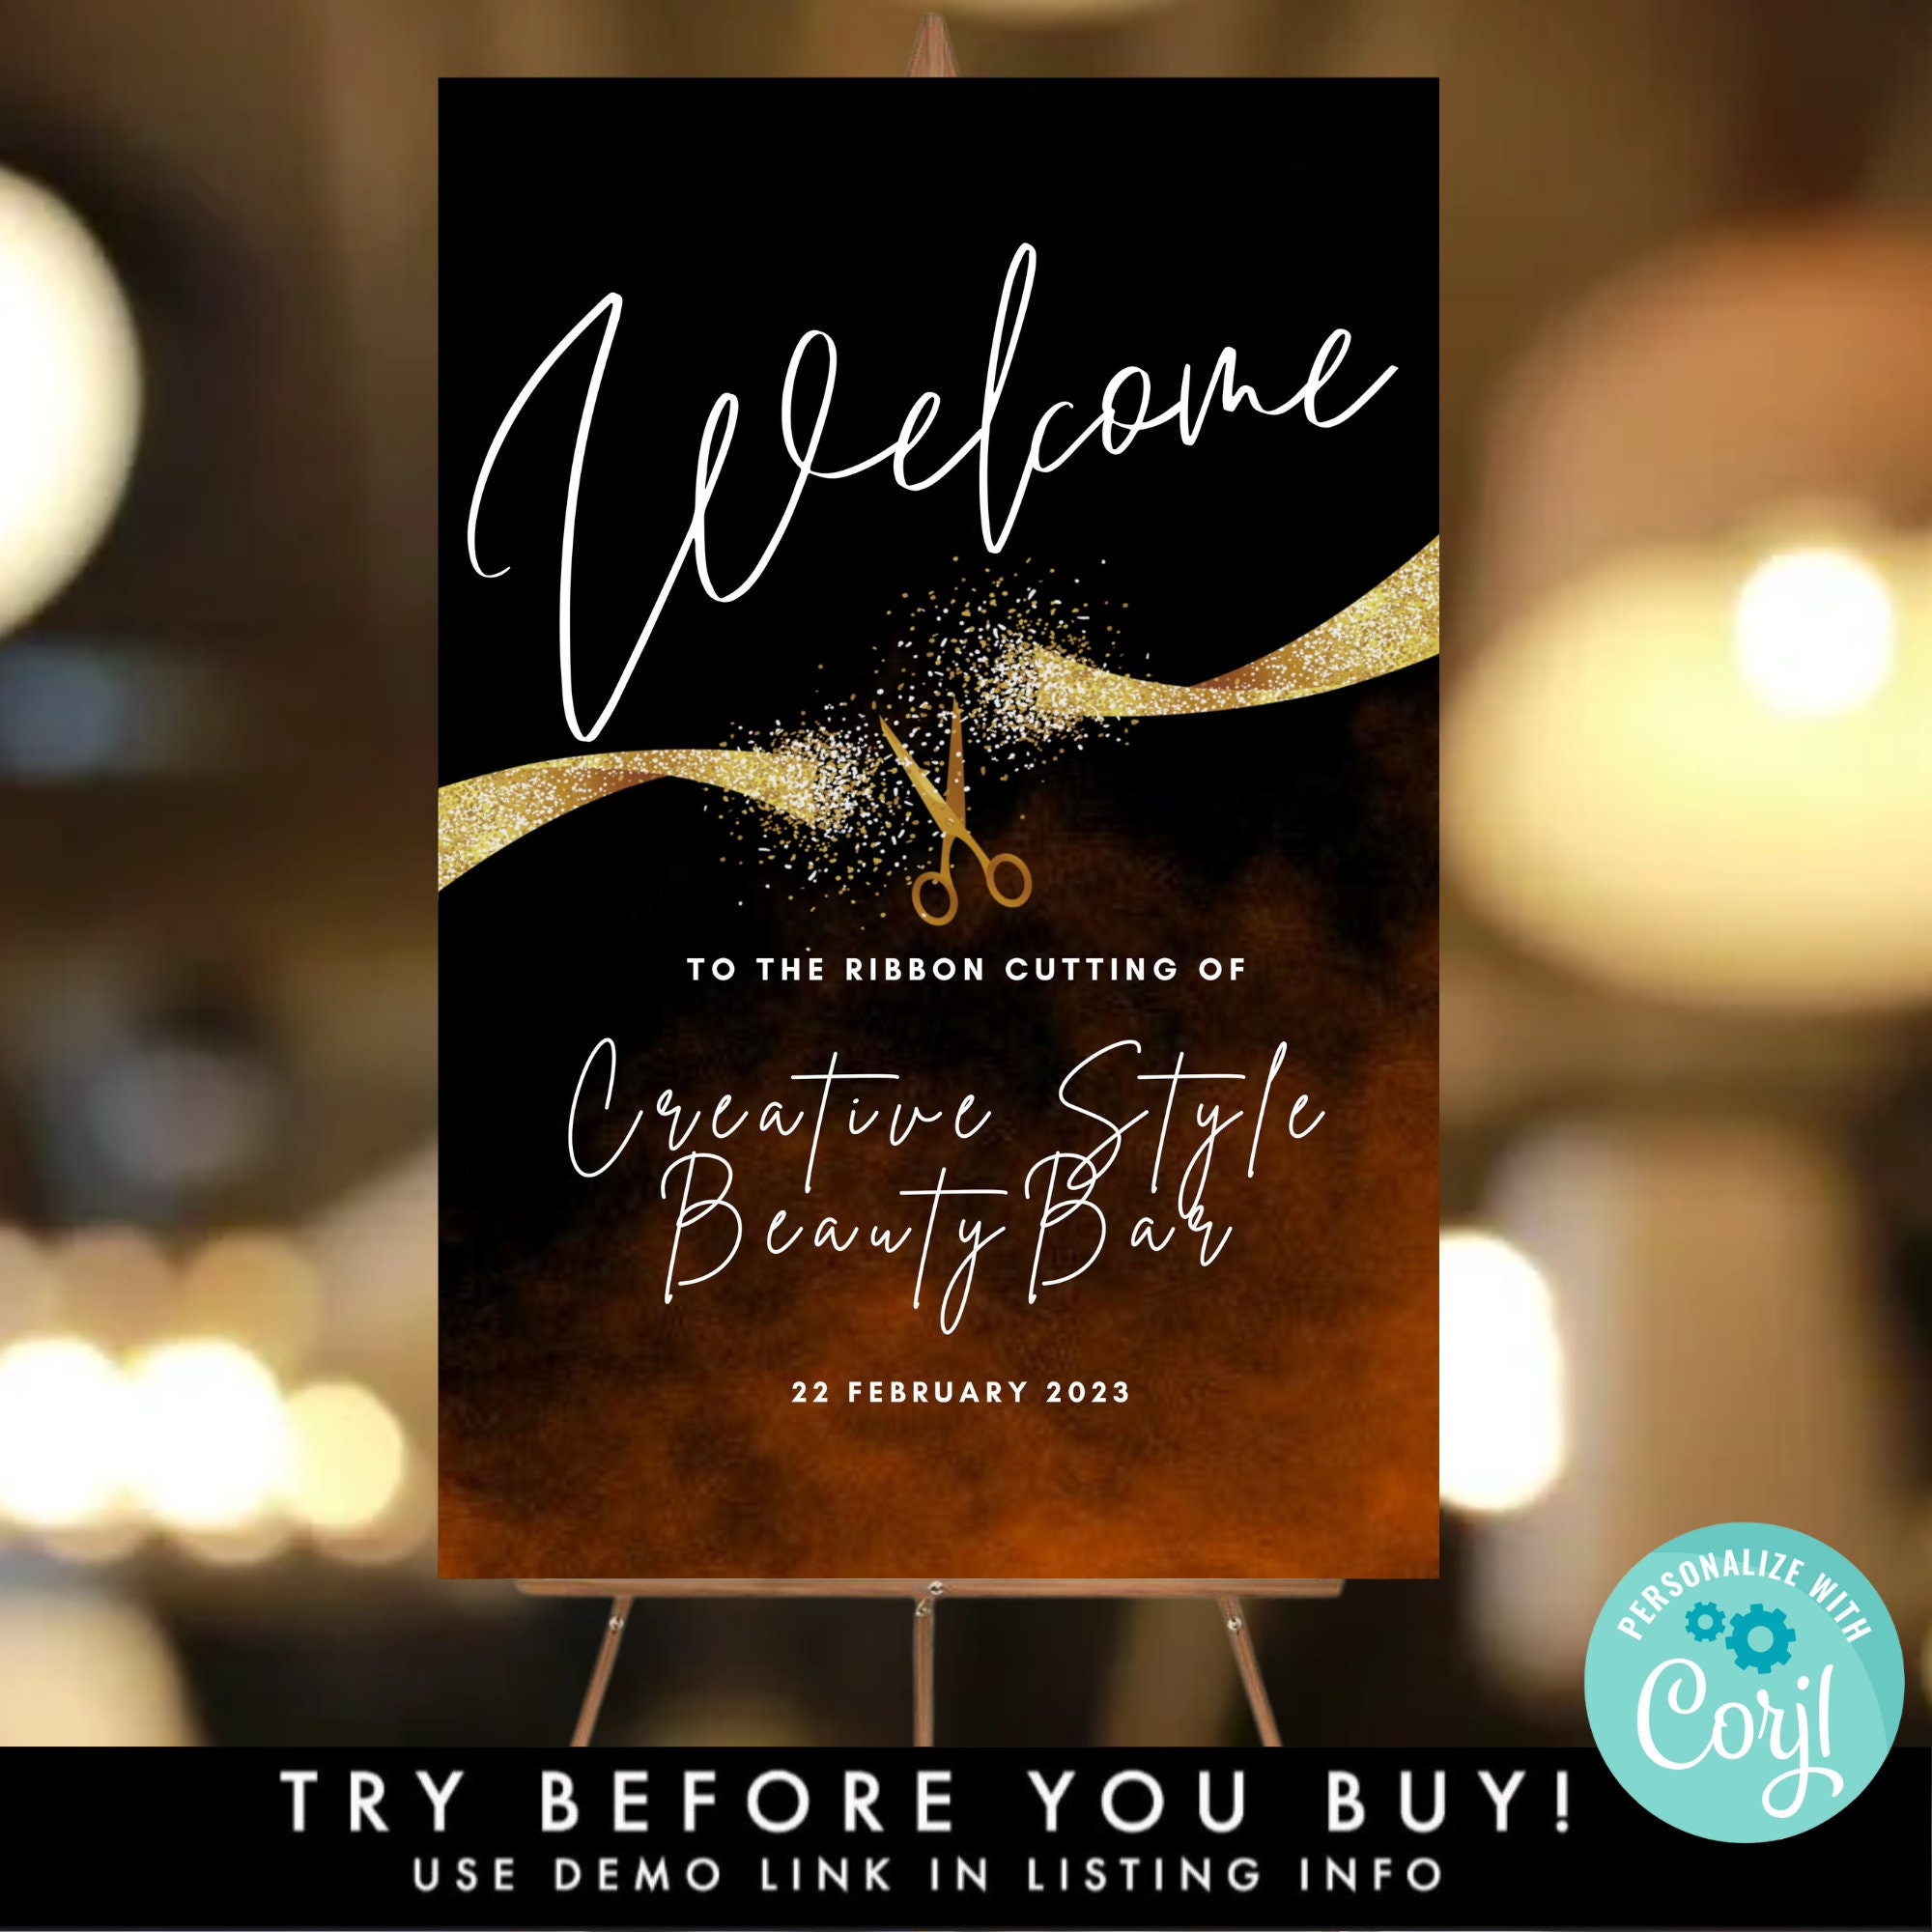 Grand Opening Welcome Sign Edit Yourself Template, Printable Sign 24x18 or  36x24, Digital Download, Launch Party Ribbon Cutting Ceremony 